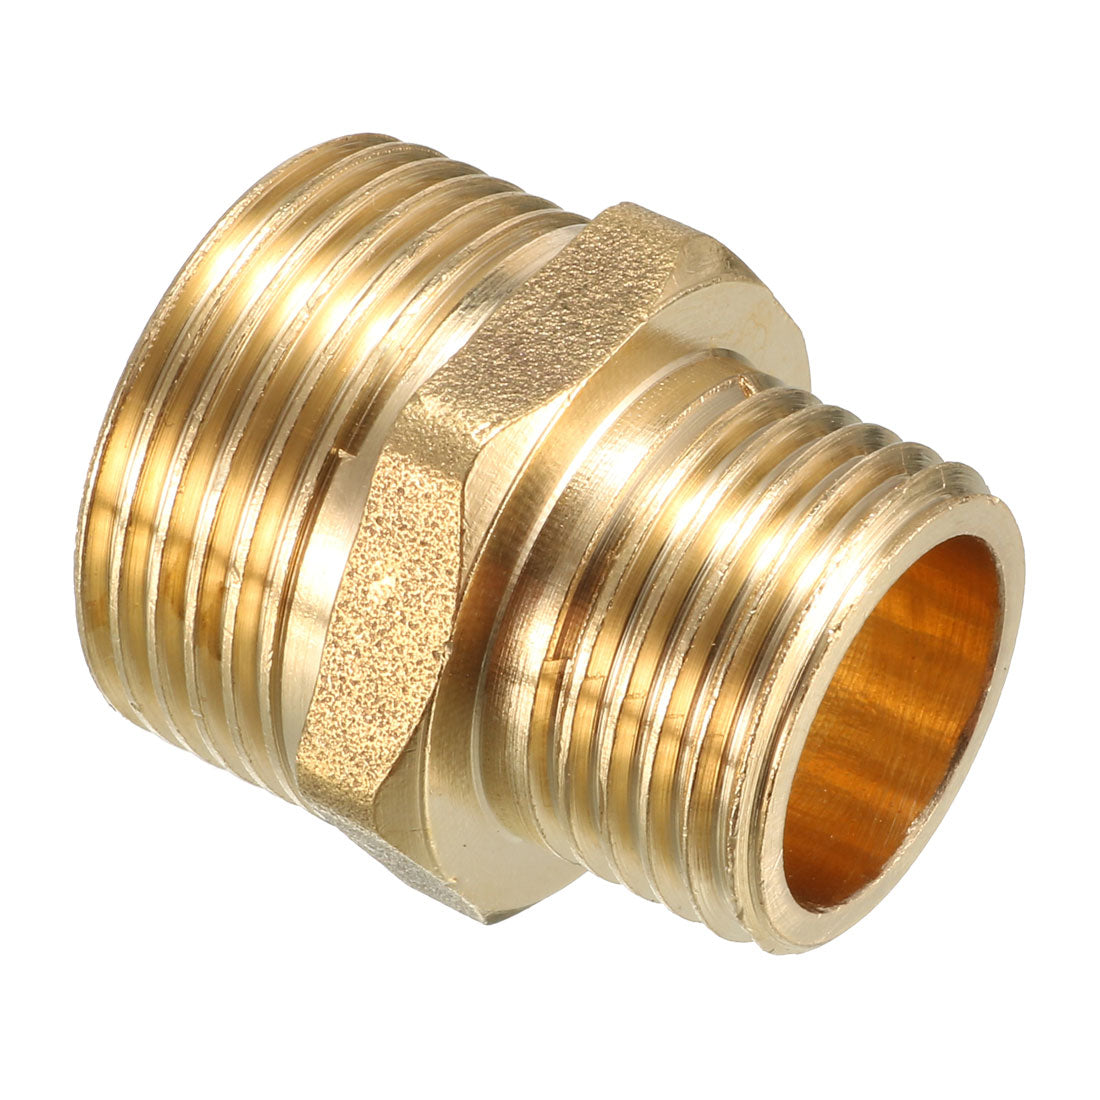 uxcell Uxcell Brass Pipe Fitting Reducing Hex Bushing 3/4 BSP Male x 1/2 BSP Male Adapter